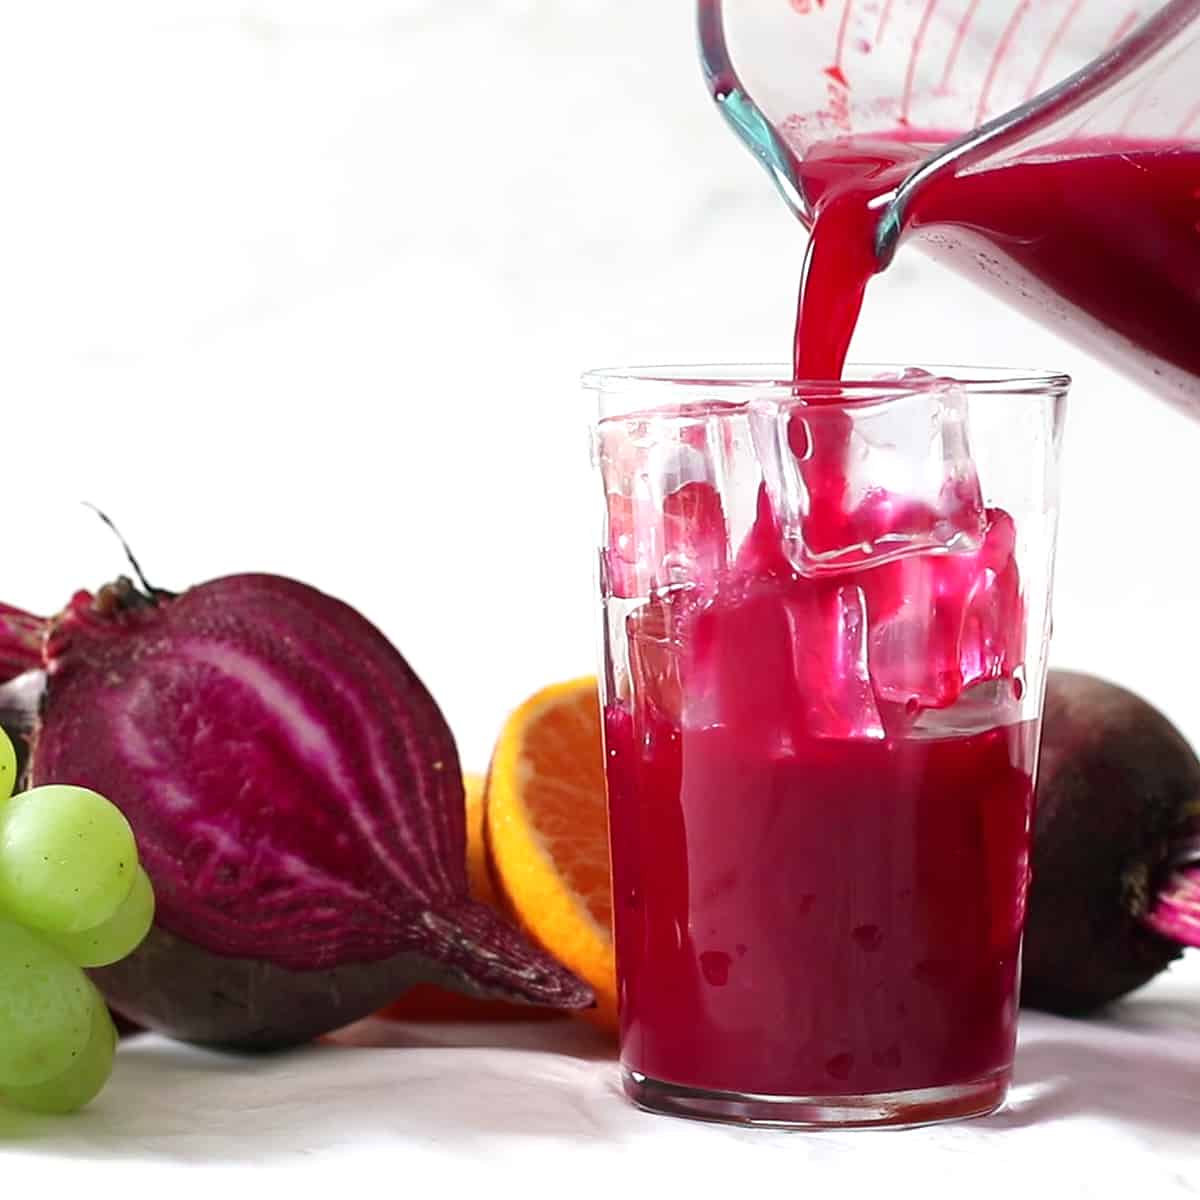 pouring beet juice over ice in a glass.